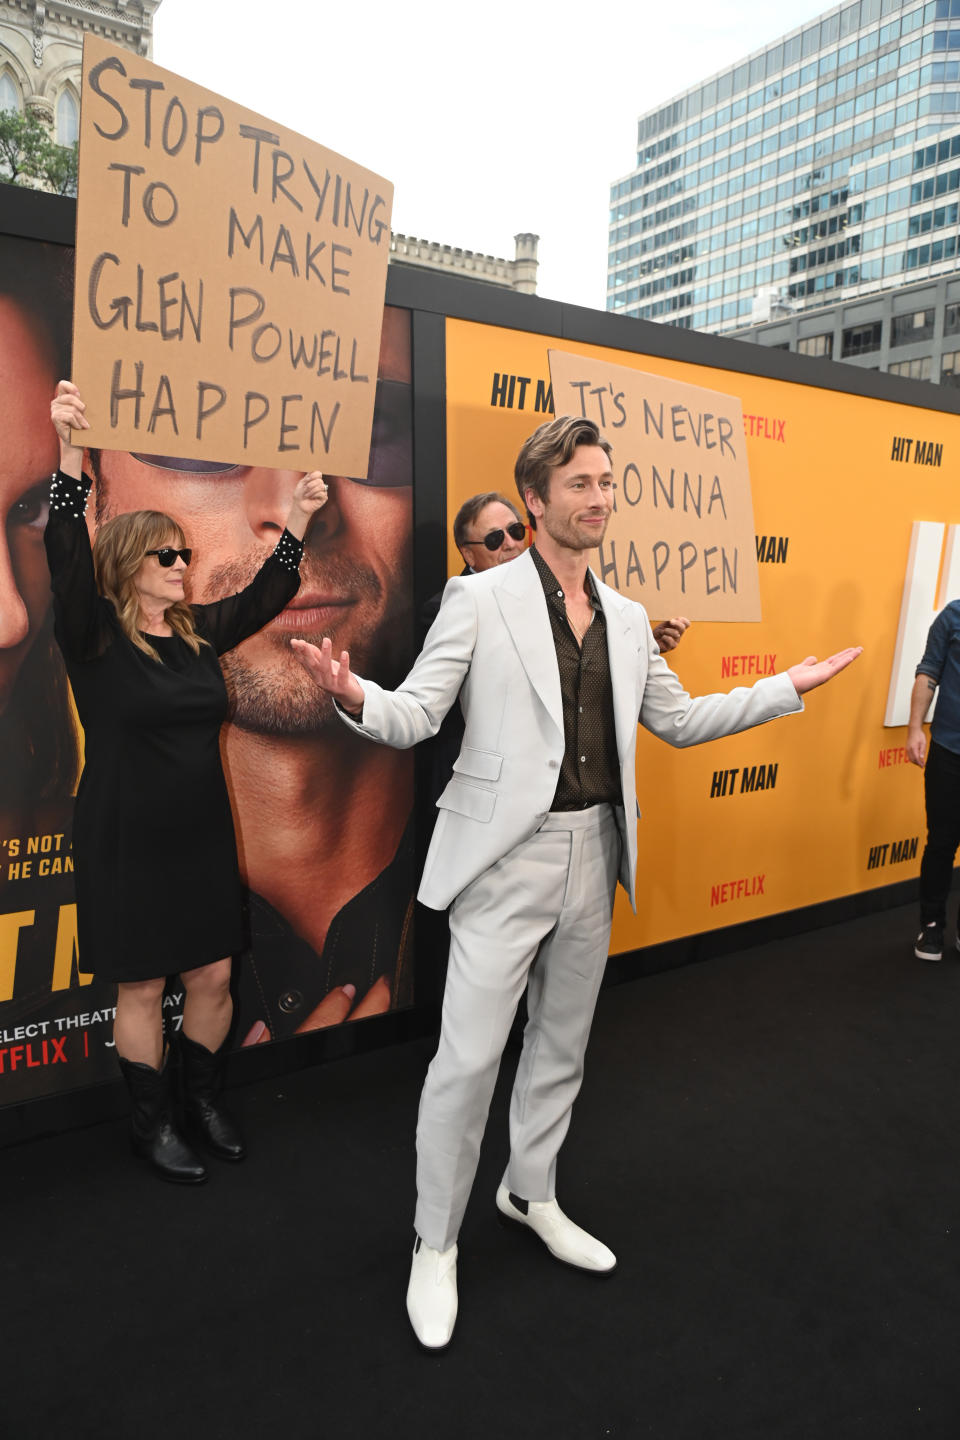 Glen Powell standing with a woman holding satirical protest signs at a movie premiere